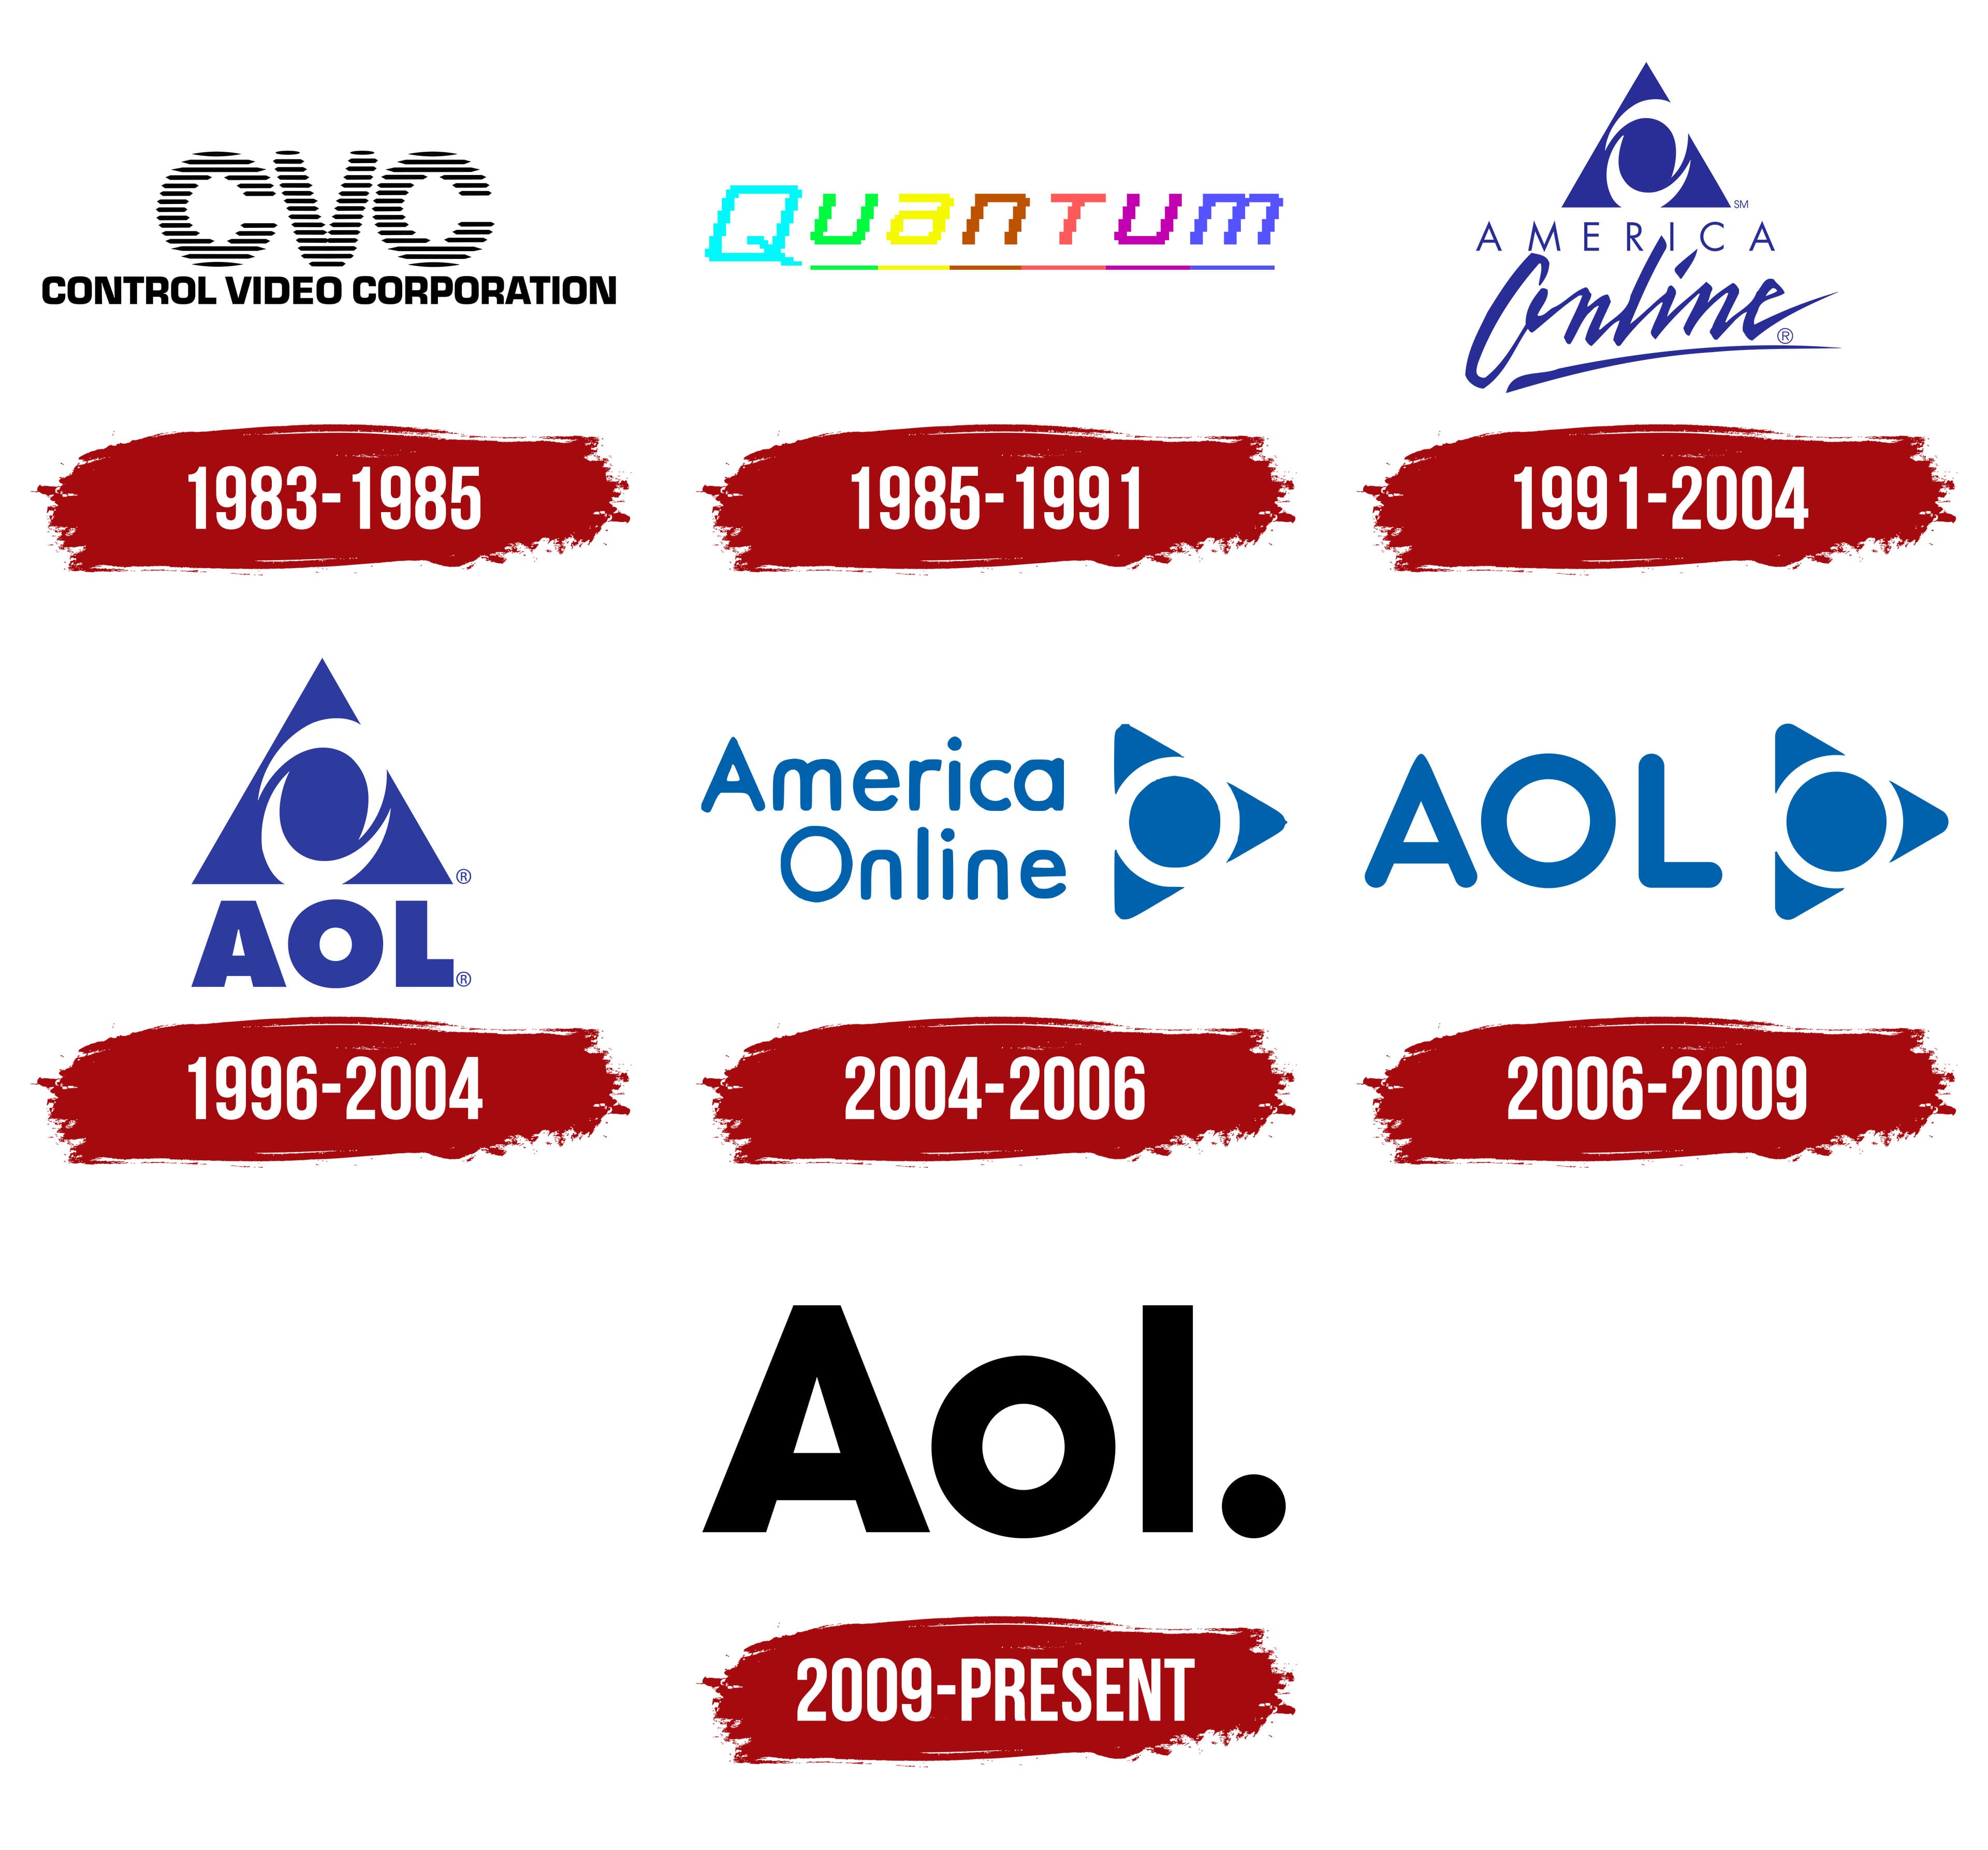 The Good News About Verizon's AOL Deal